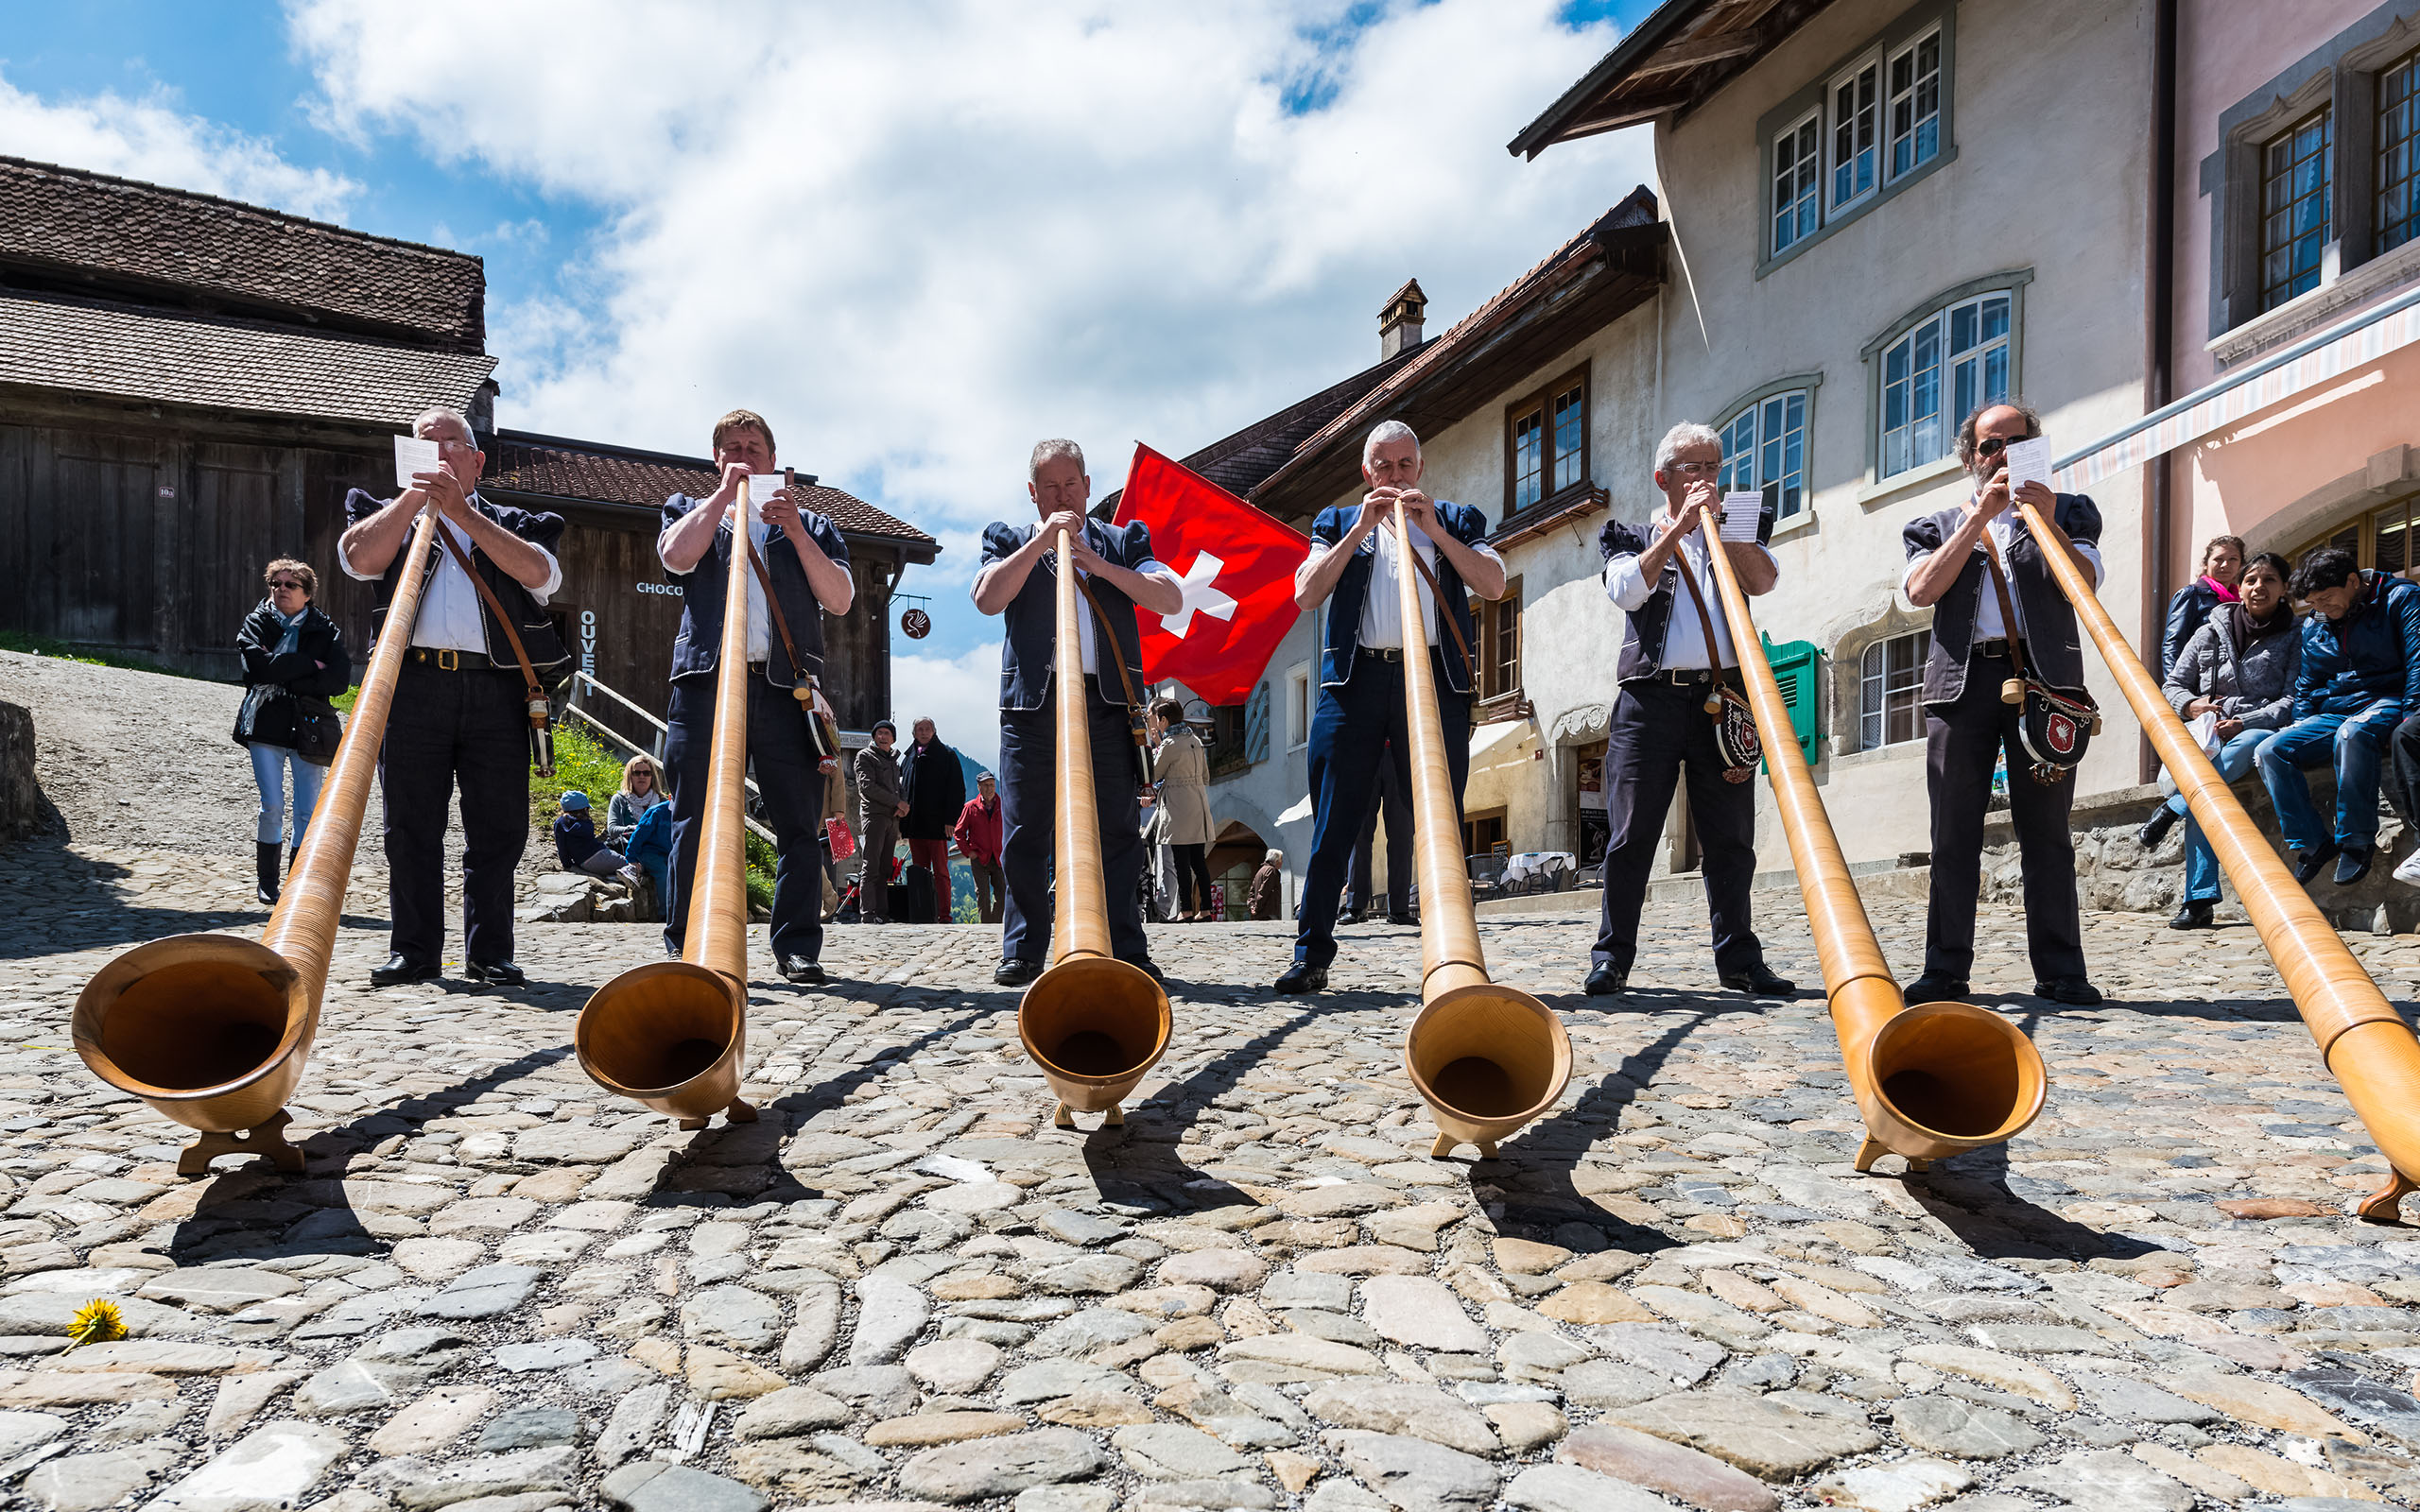 Cheese festival, Gruyere, Switzerland - May 4, 2014. Swiss musicians play the alphorn, typical instrument on the main street of the Gruyere village on May 4, 2014